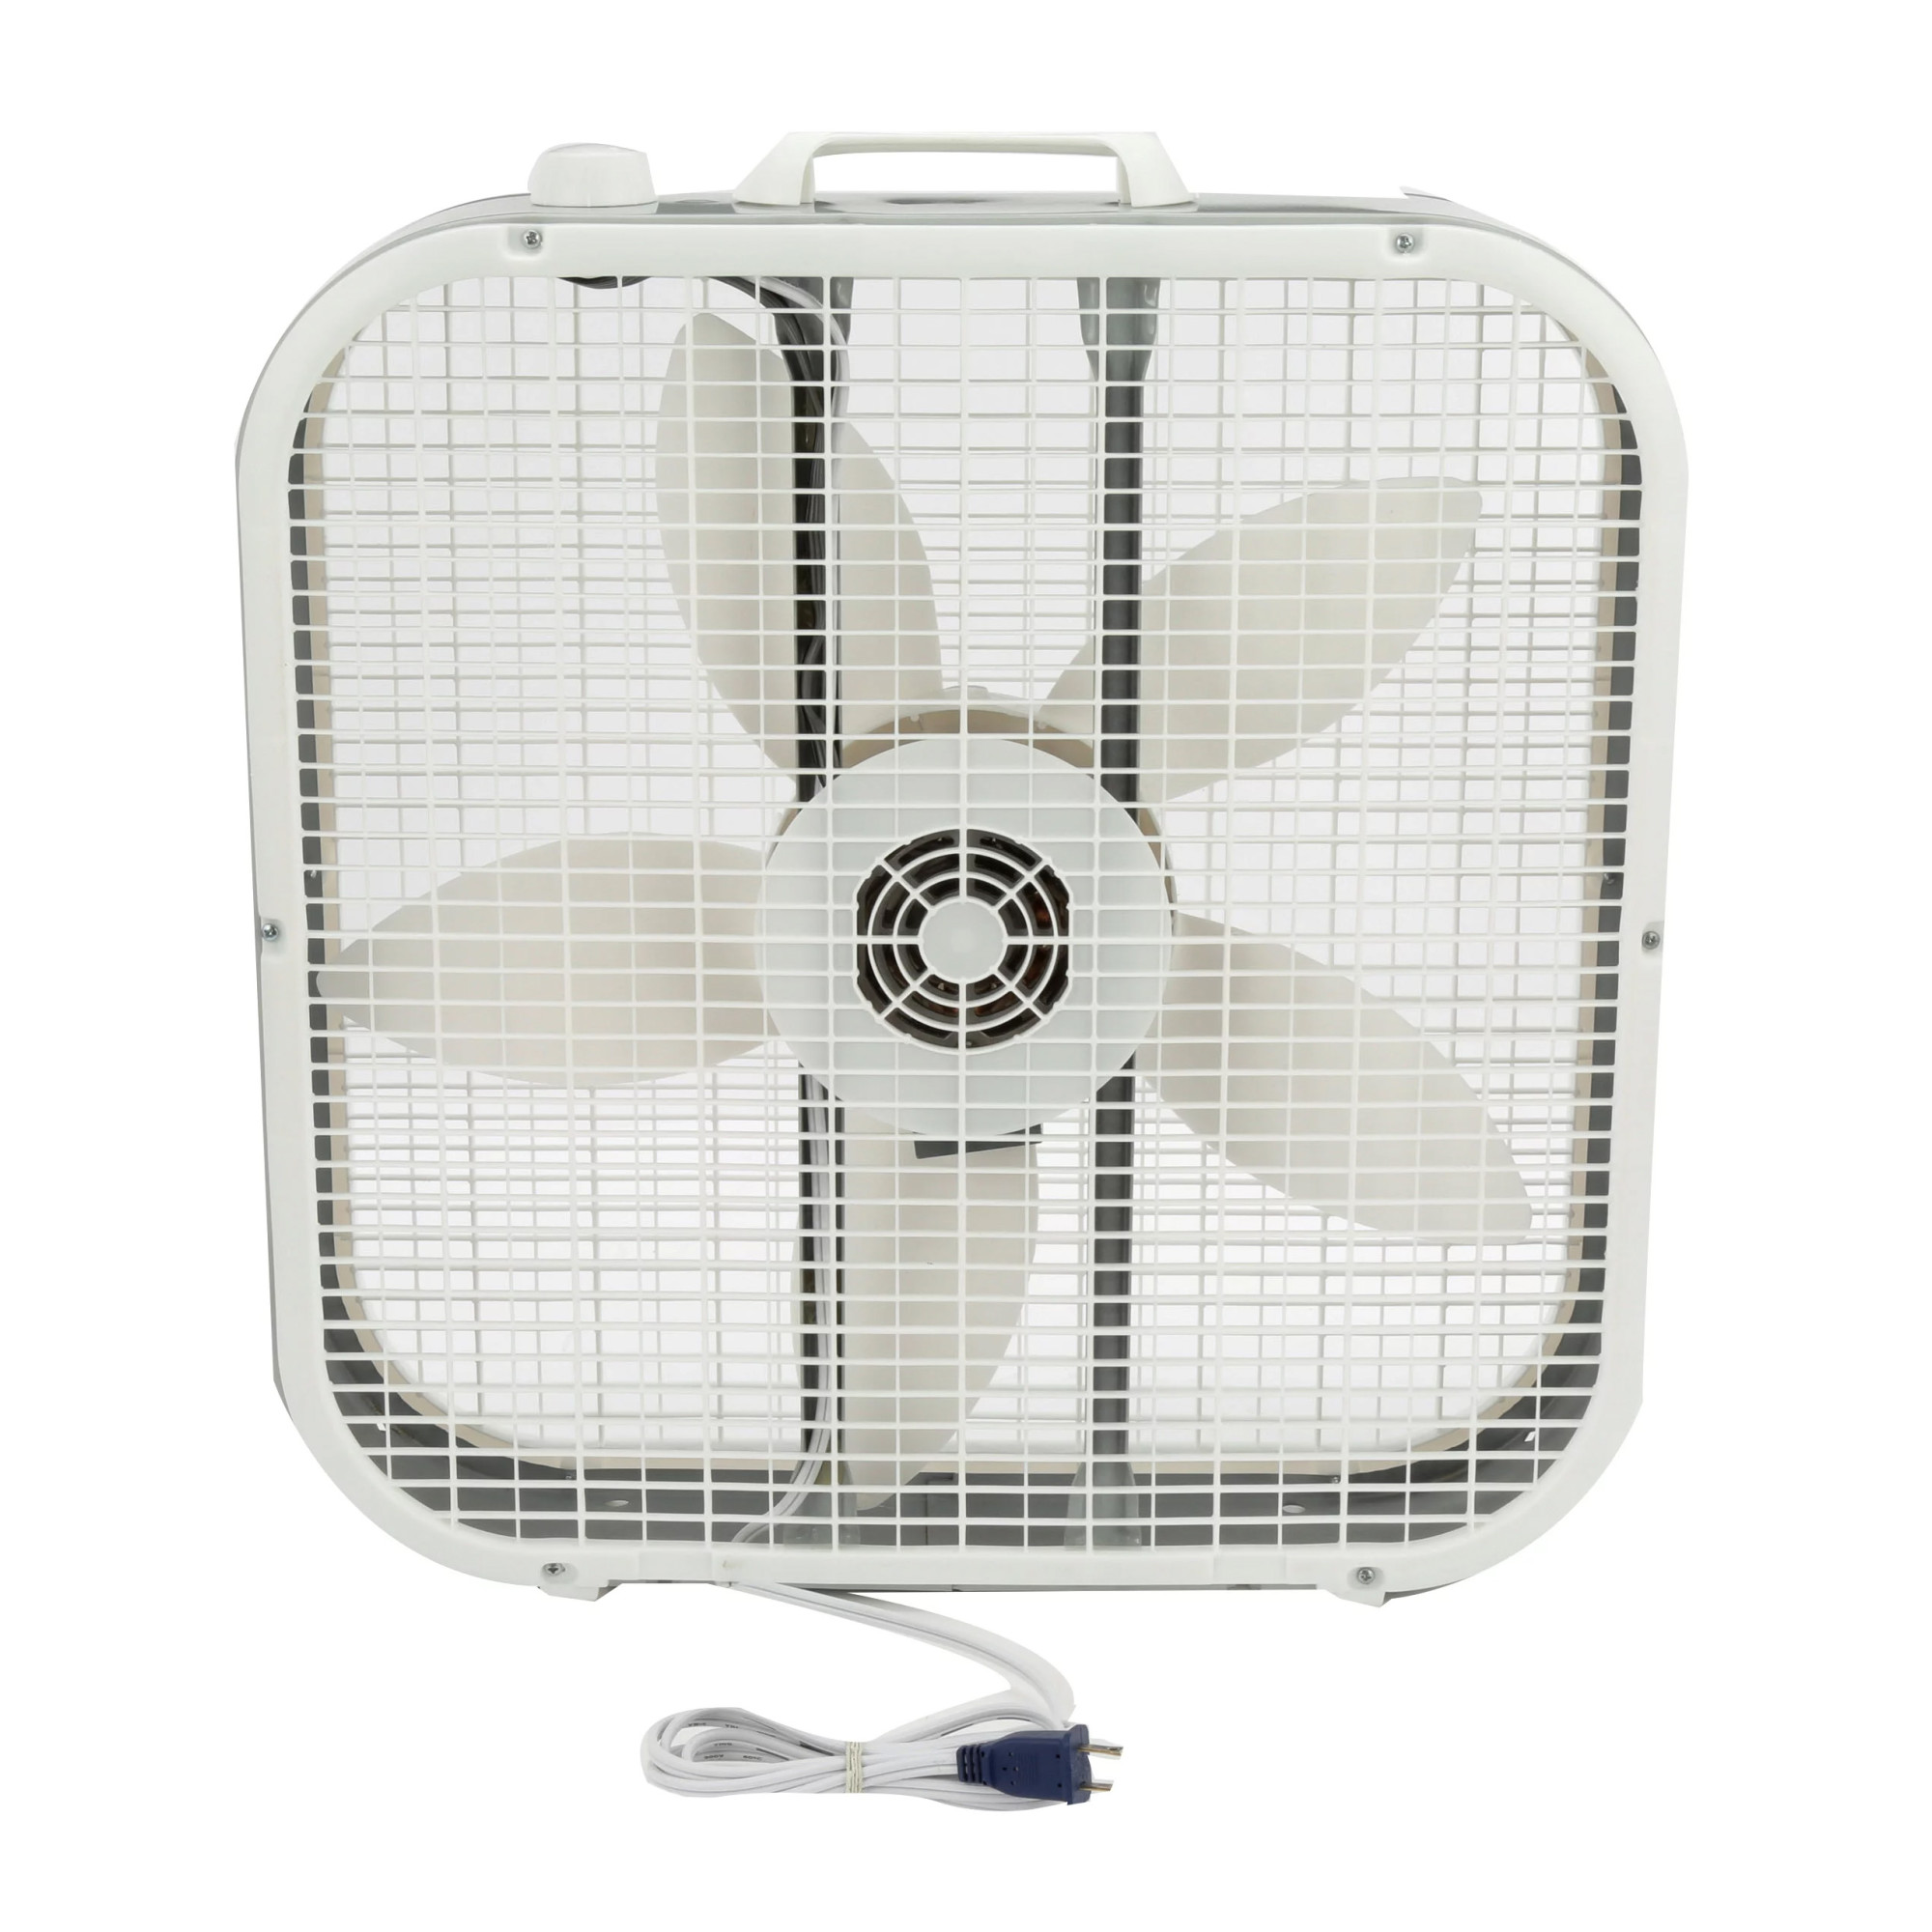 Lasko 20" Classic Box Fan with Weather-Resistant Motor, 3 Speeds, 22.5" H, White, B20200, New - image 4 of 6